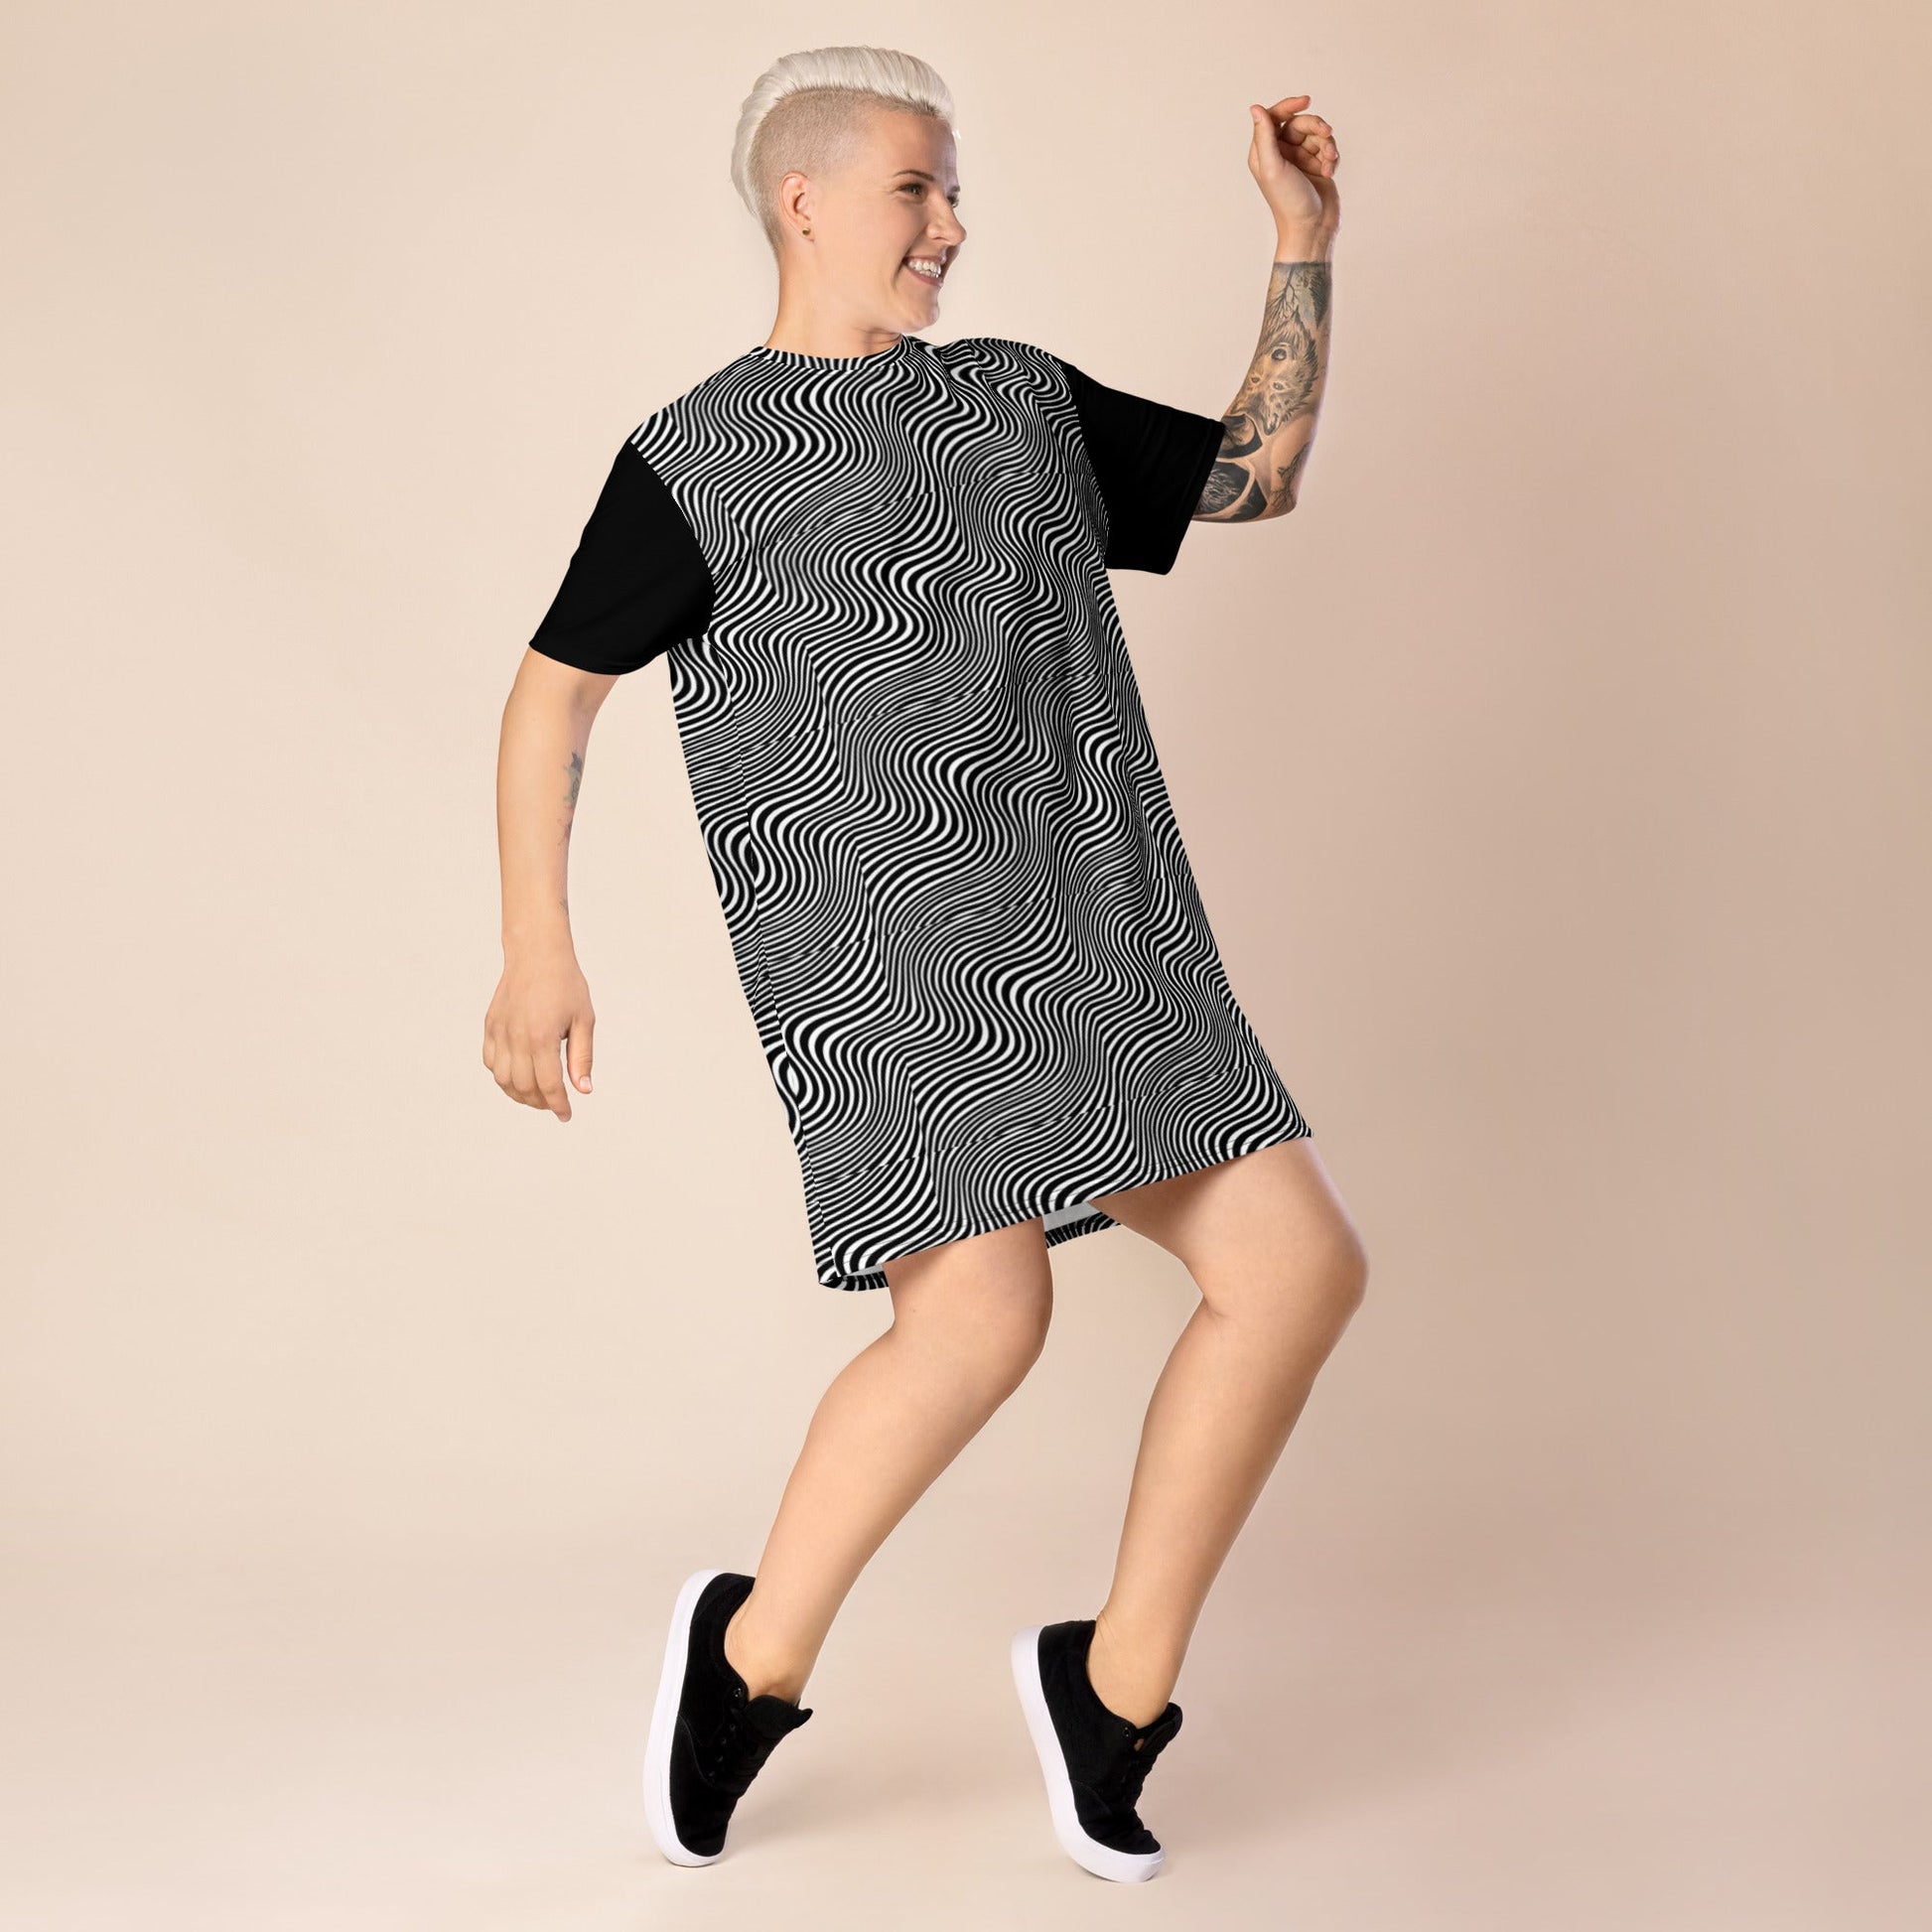 Farris Wheel Limited T-Shirt Dress - BeExtra! Apparel & More